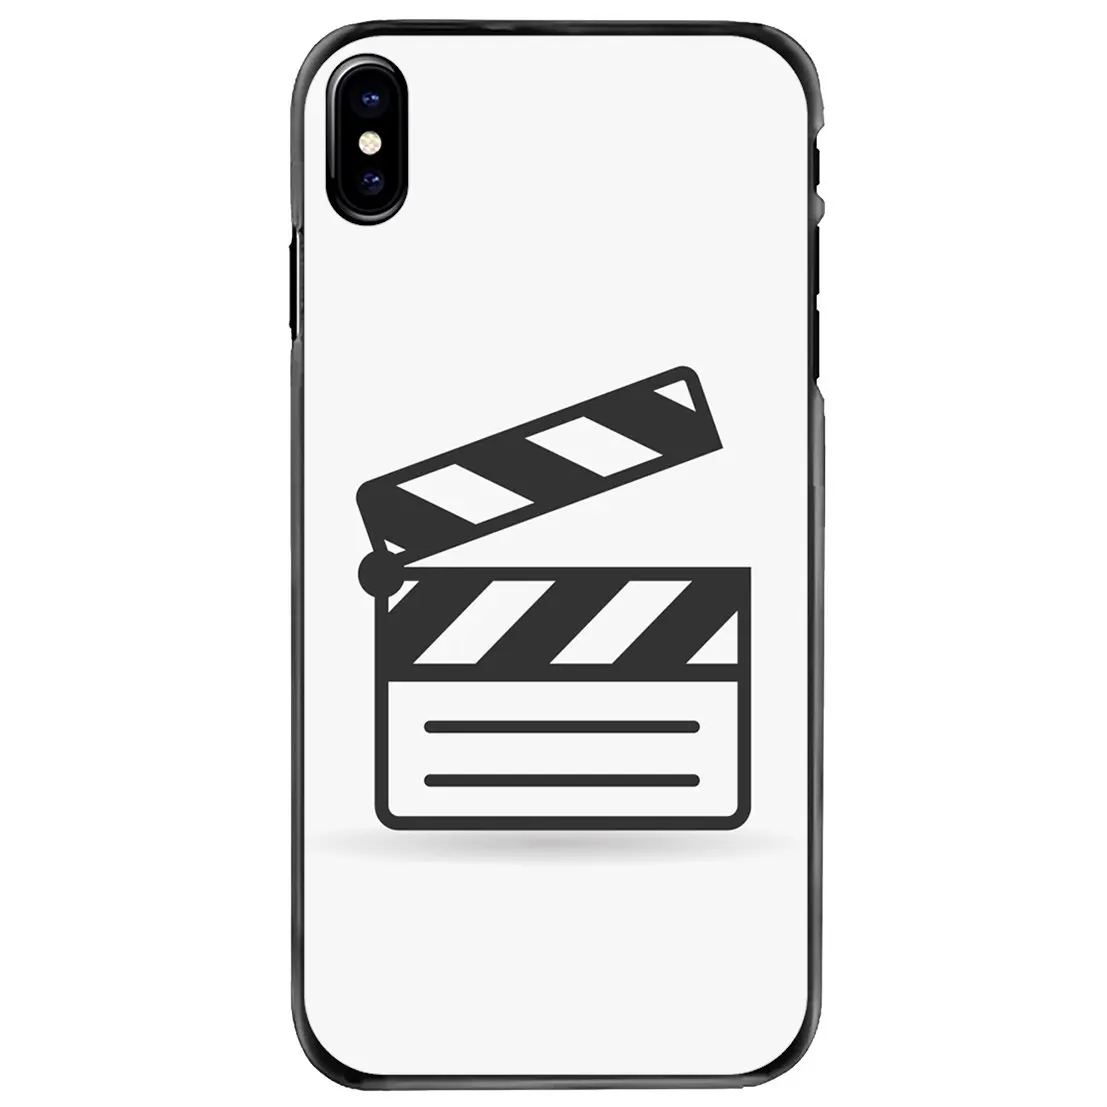 Hard Phone Case Movie Clapper Board Stock For LG G6 L90 V20 Nexus 5X K10 Moto E E2 E3 G G2 G3 G4 G5 PLUS X2 Play | Мобильные